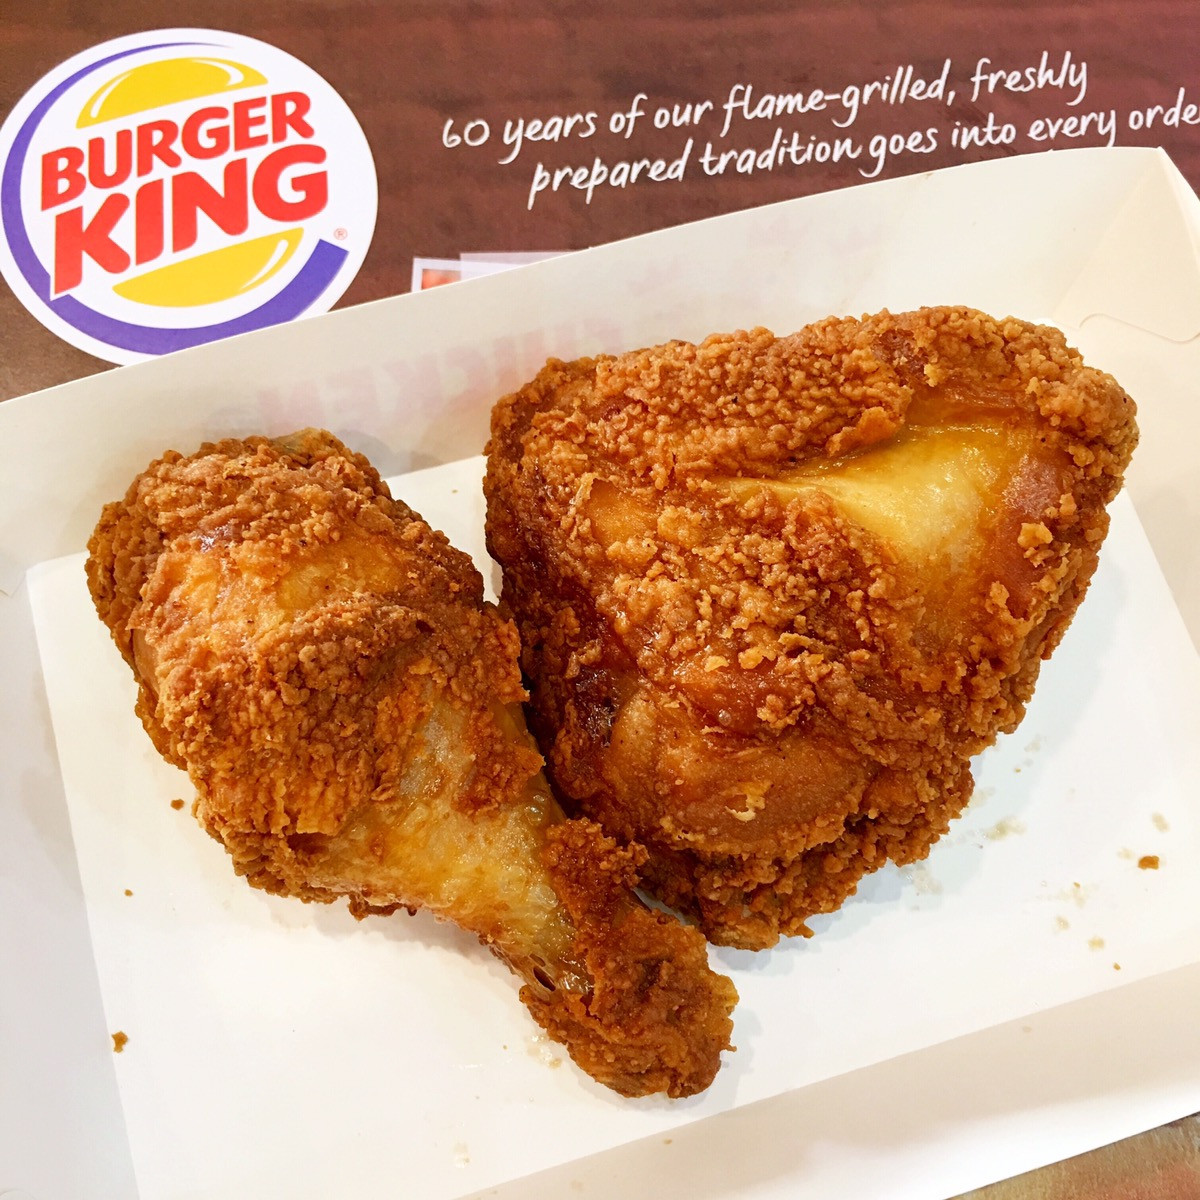 Kings Fried Chicken Awesome Burger King’s Fried Chicken Vivacity Kuching